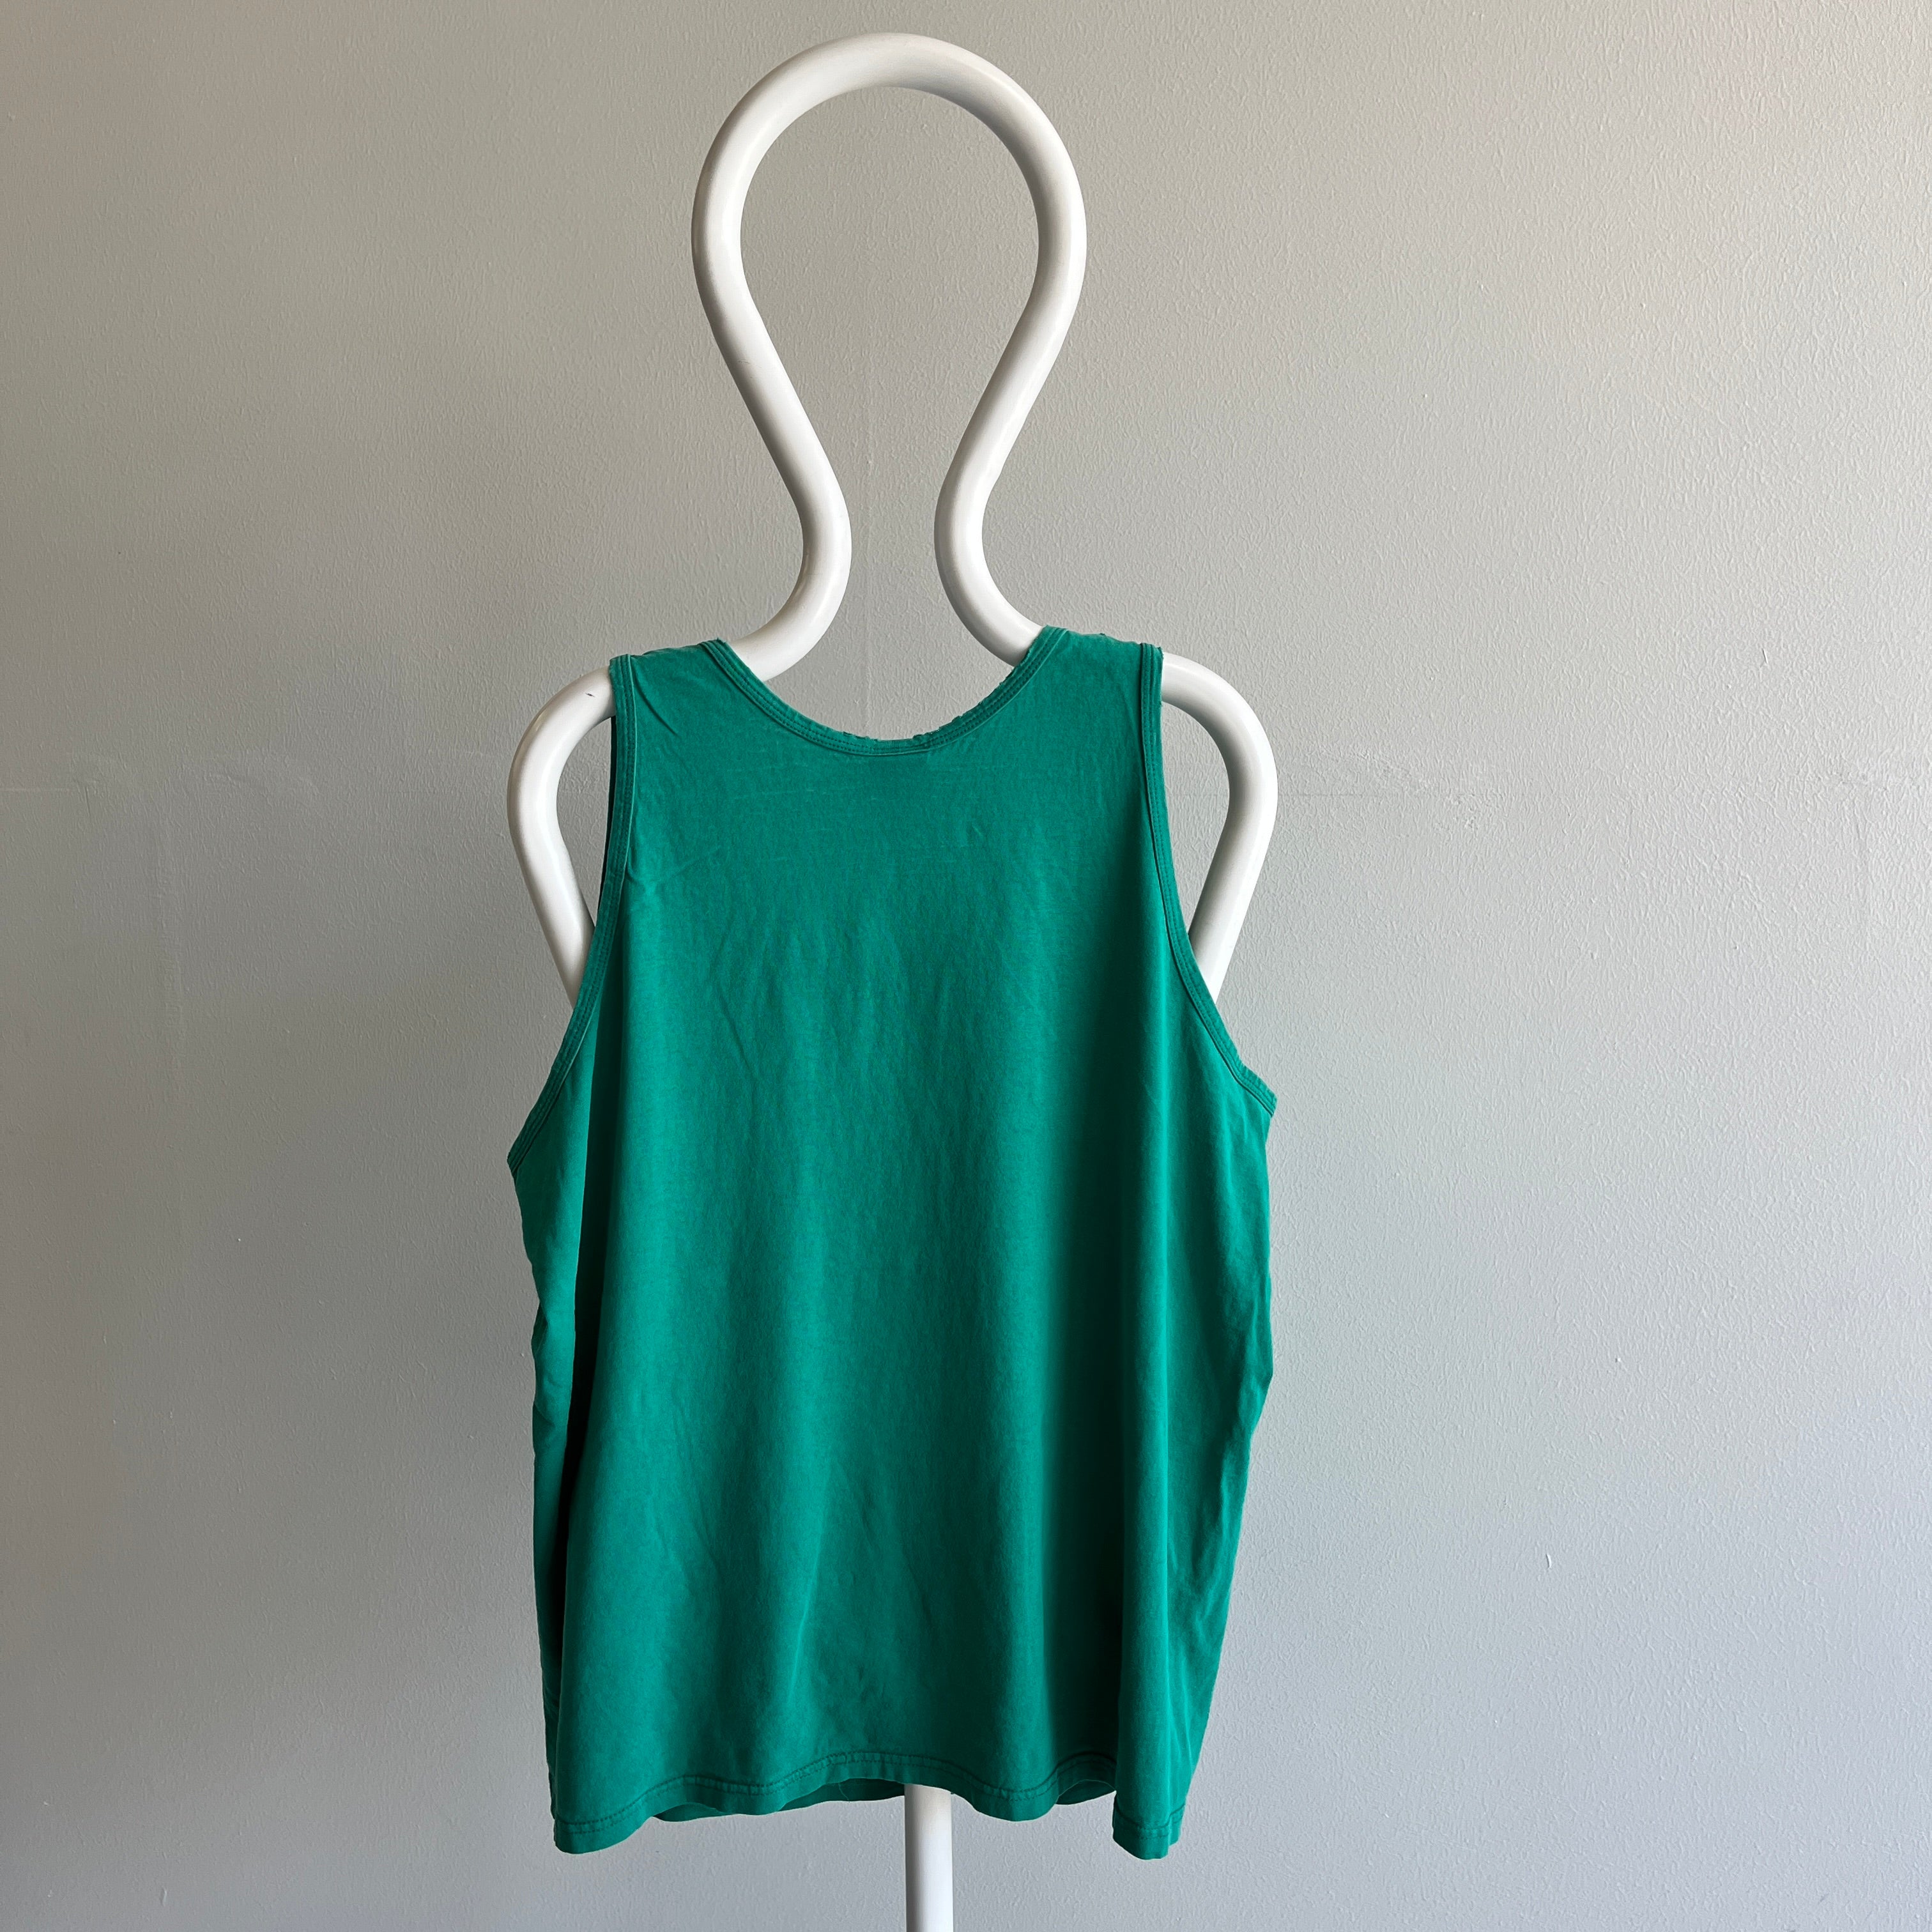 1990s Official Olympics Apparel Lightly Tattered Green/Teal Cotton Tank Top